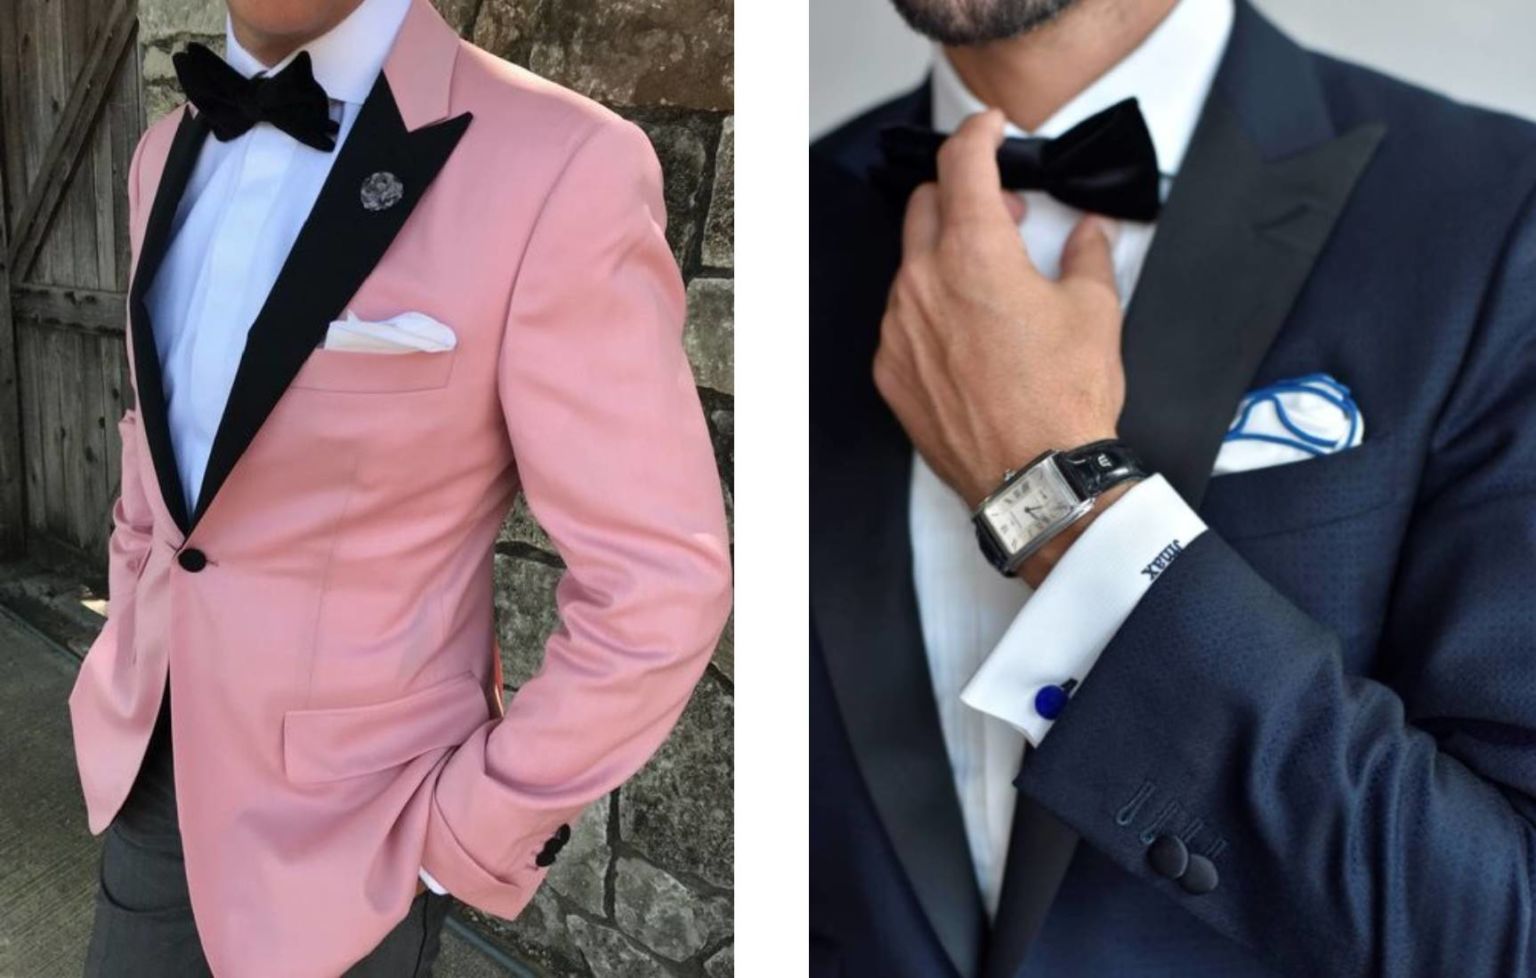 Understanding The Semi Formal Dress Code With Video Examples